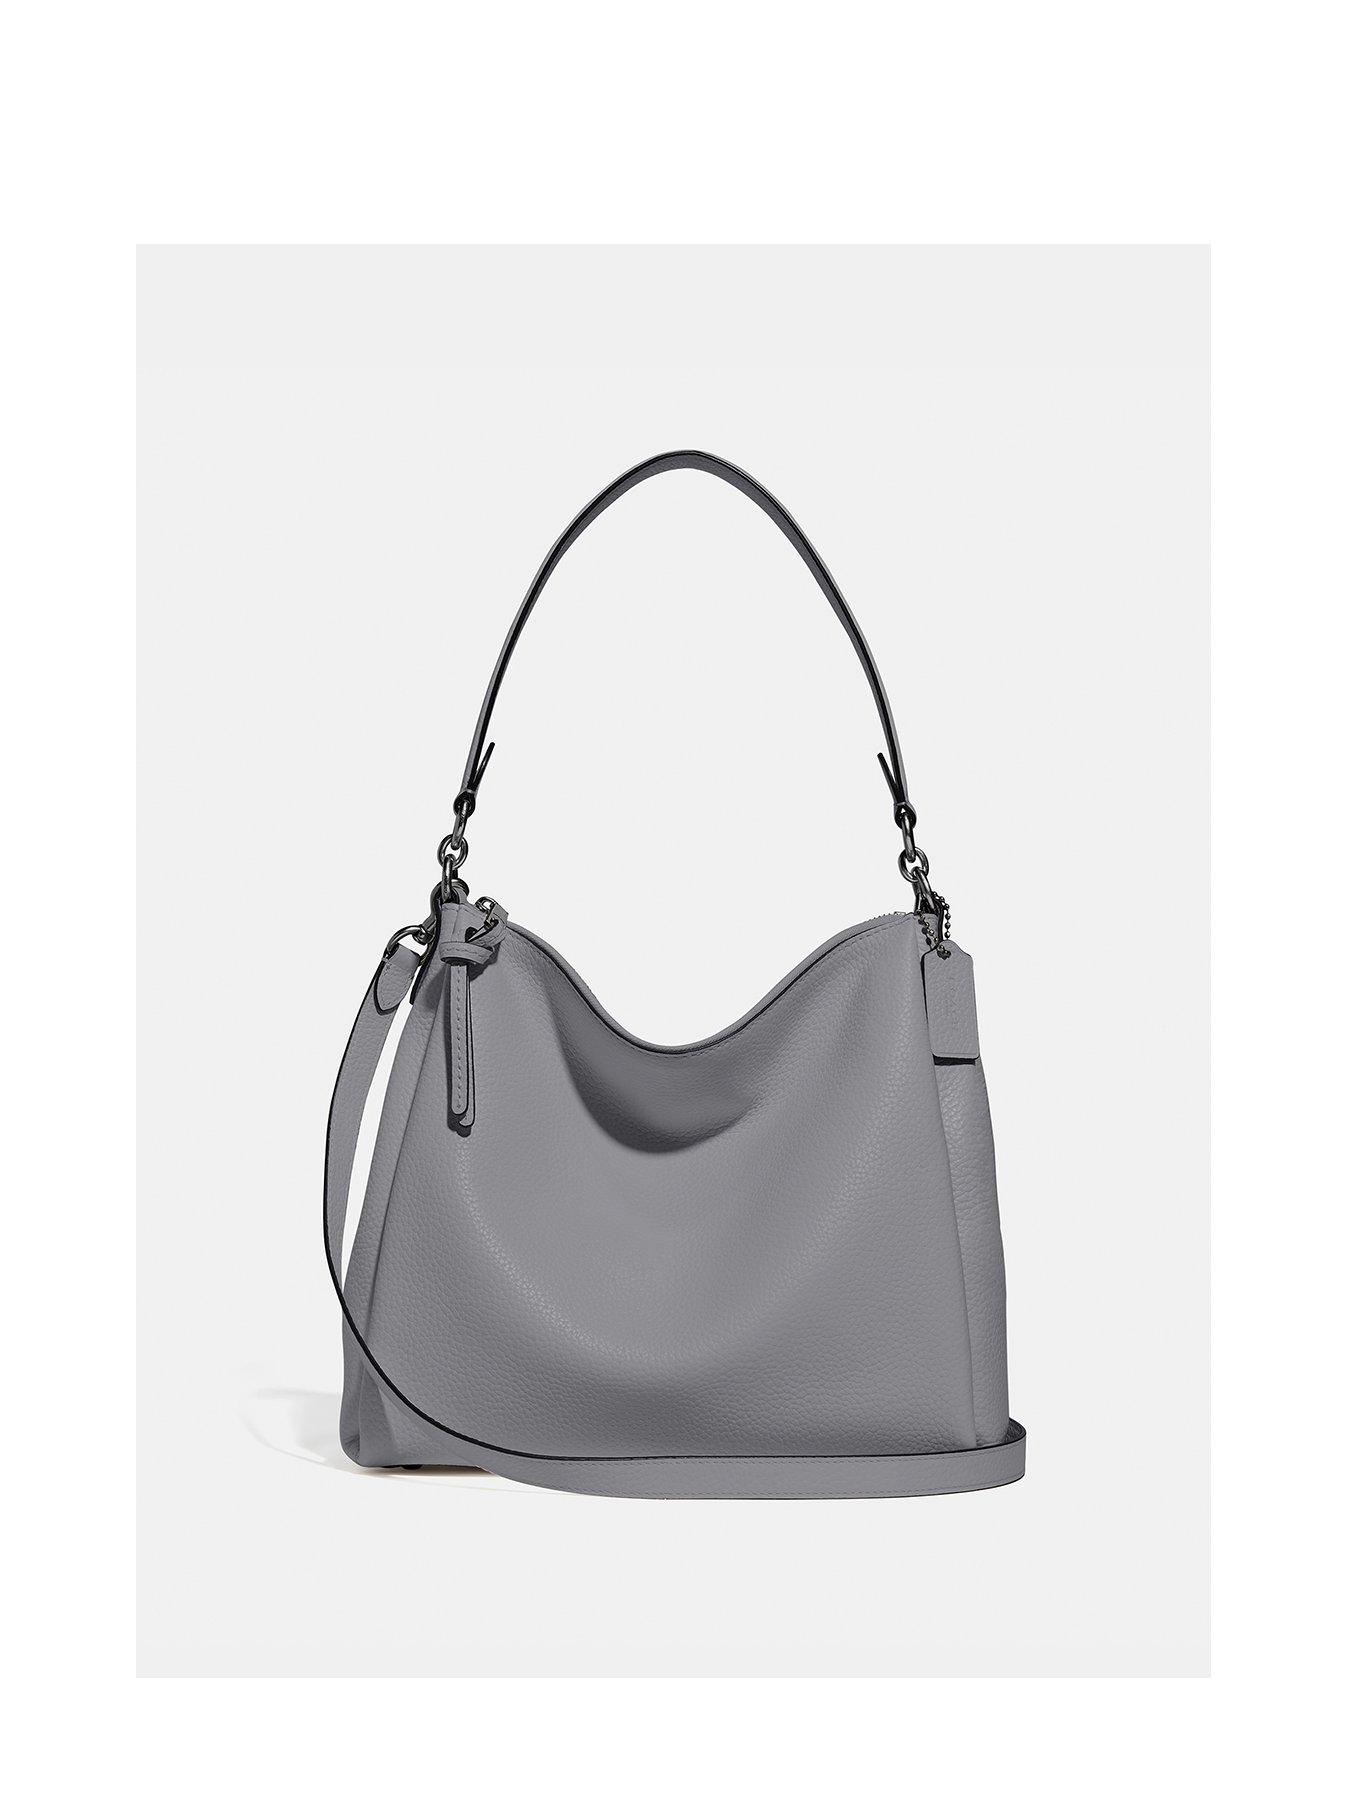 COACH Shay Soft Pebble Leather Shoulder Bag - Grey | very.co.uk